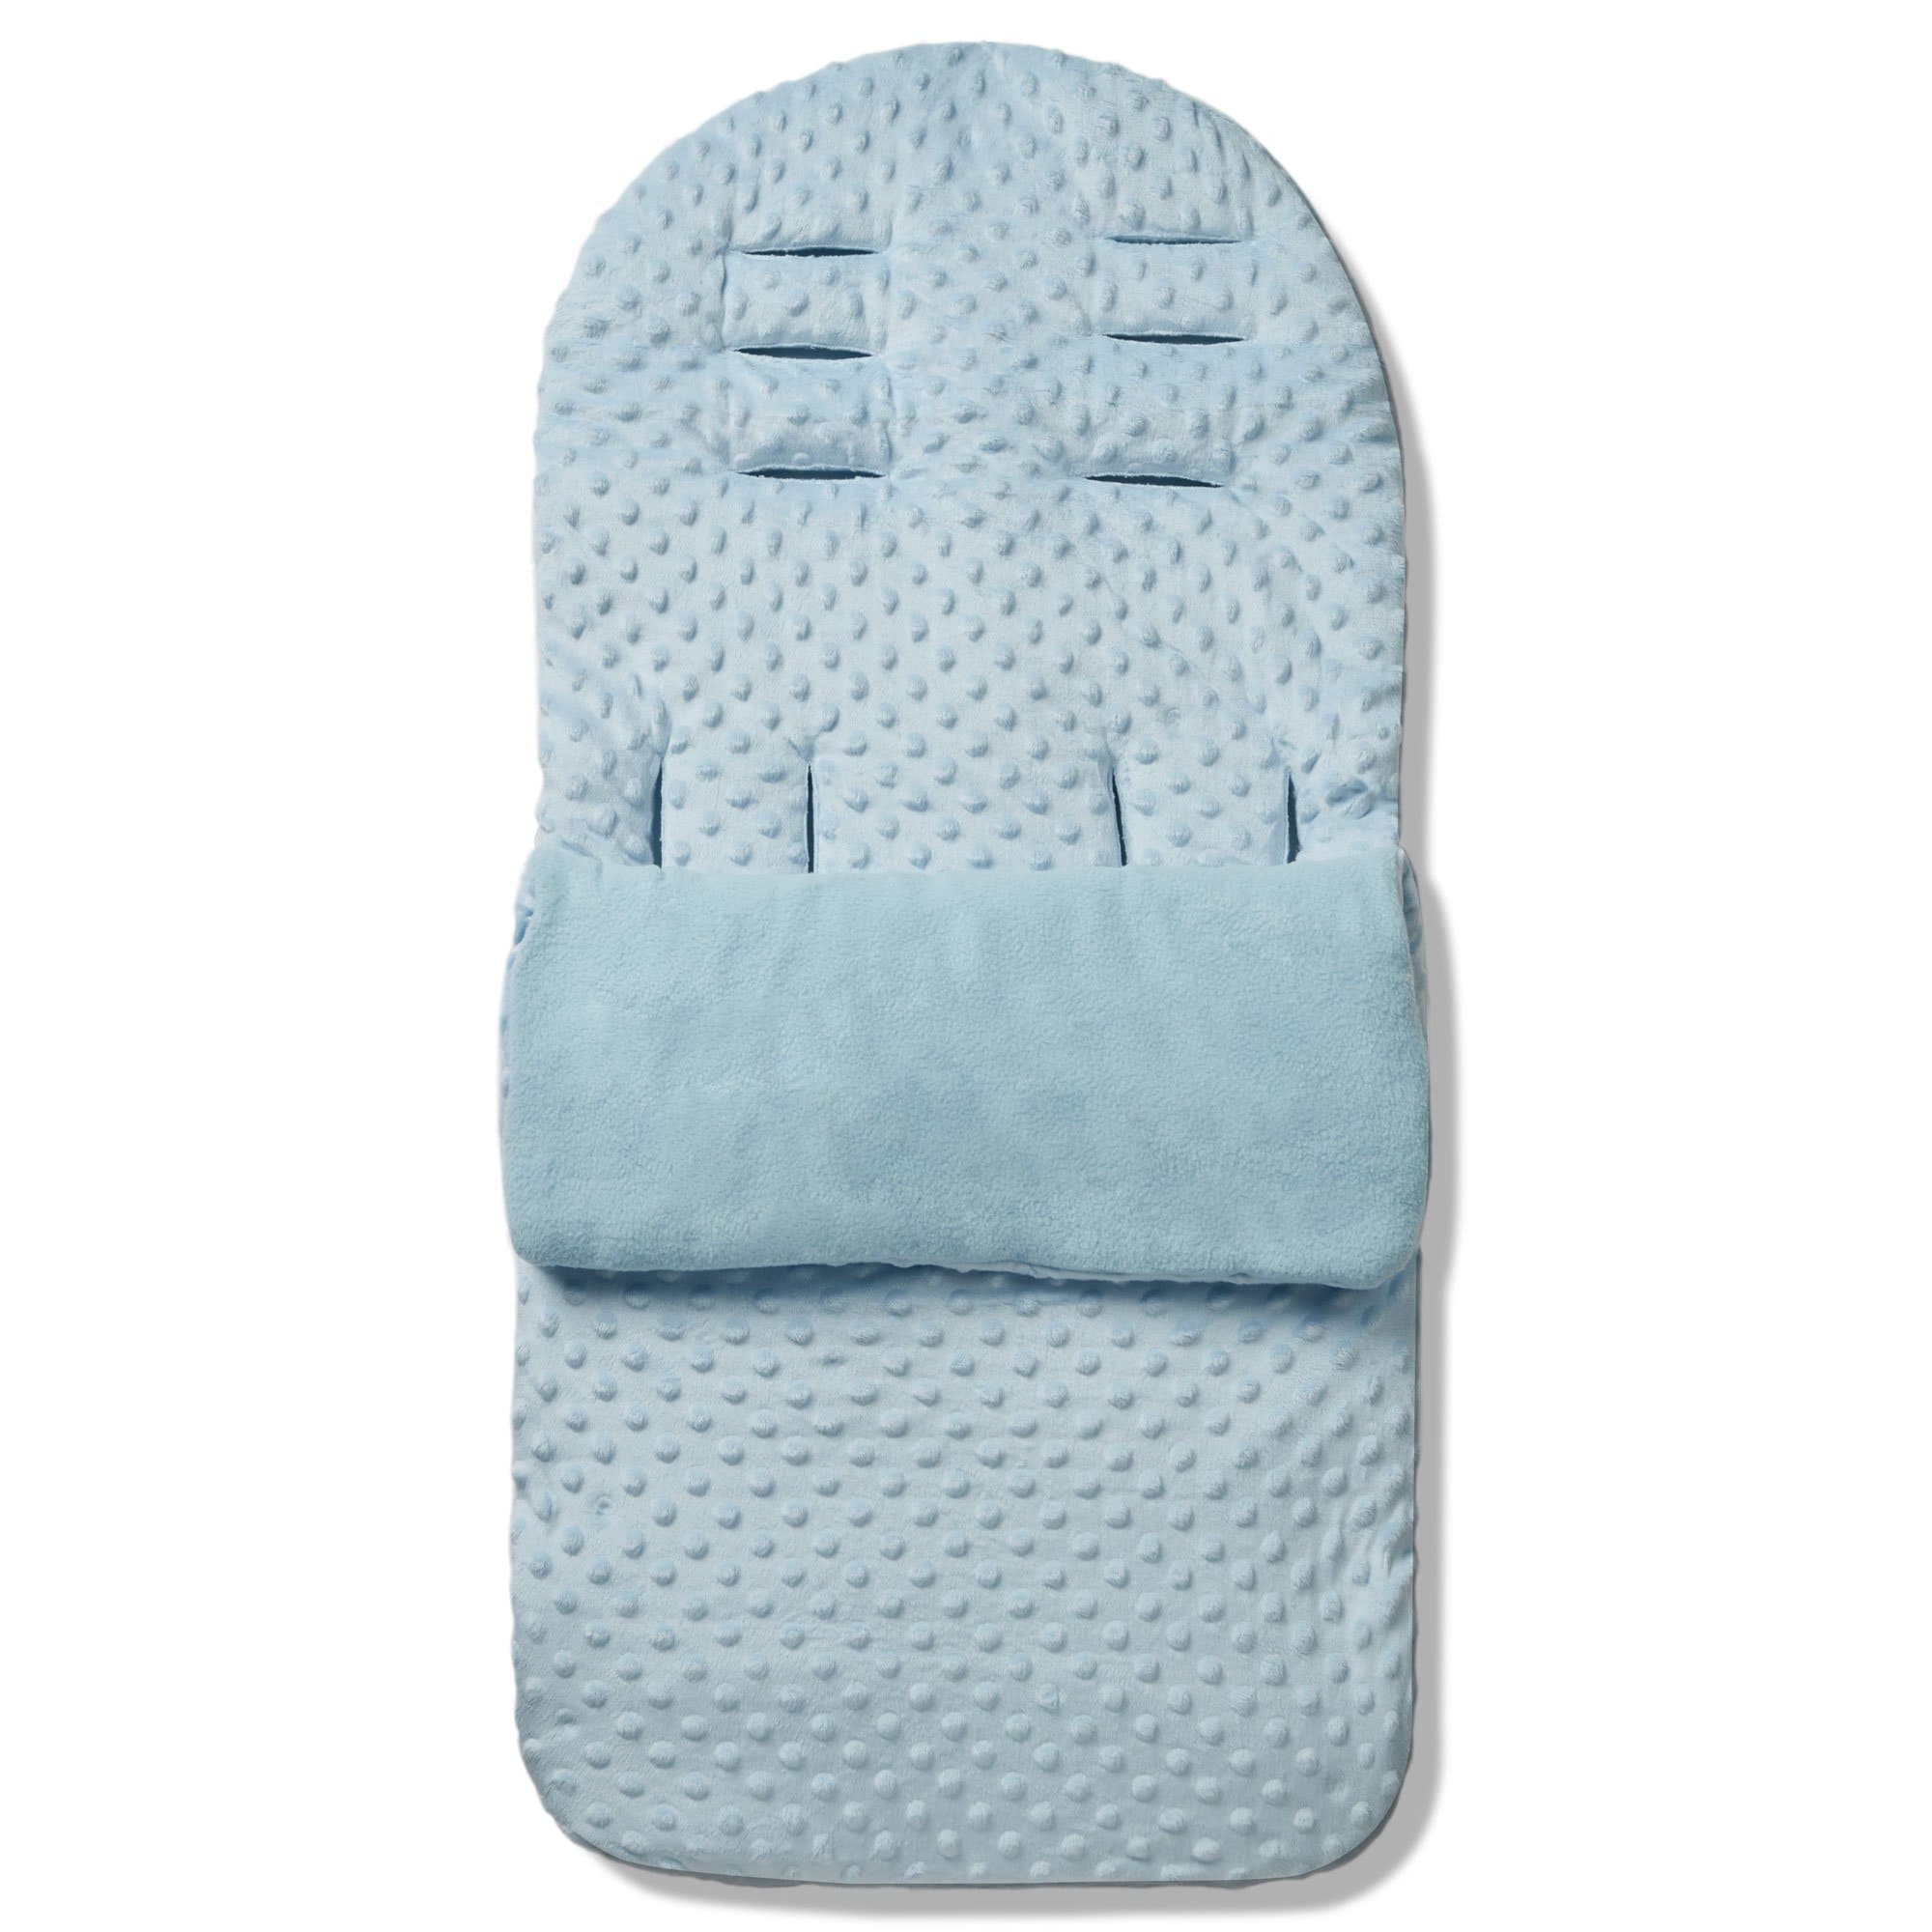 Dimple Footmuff / Cosy Toes Compatible with Noukies - Blue / Fits All Models | For Your Little One